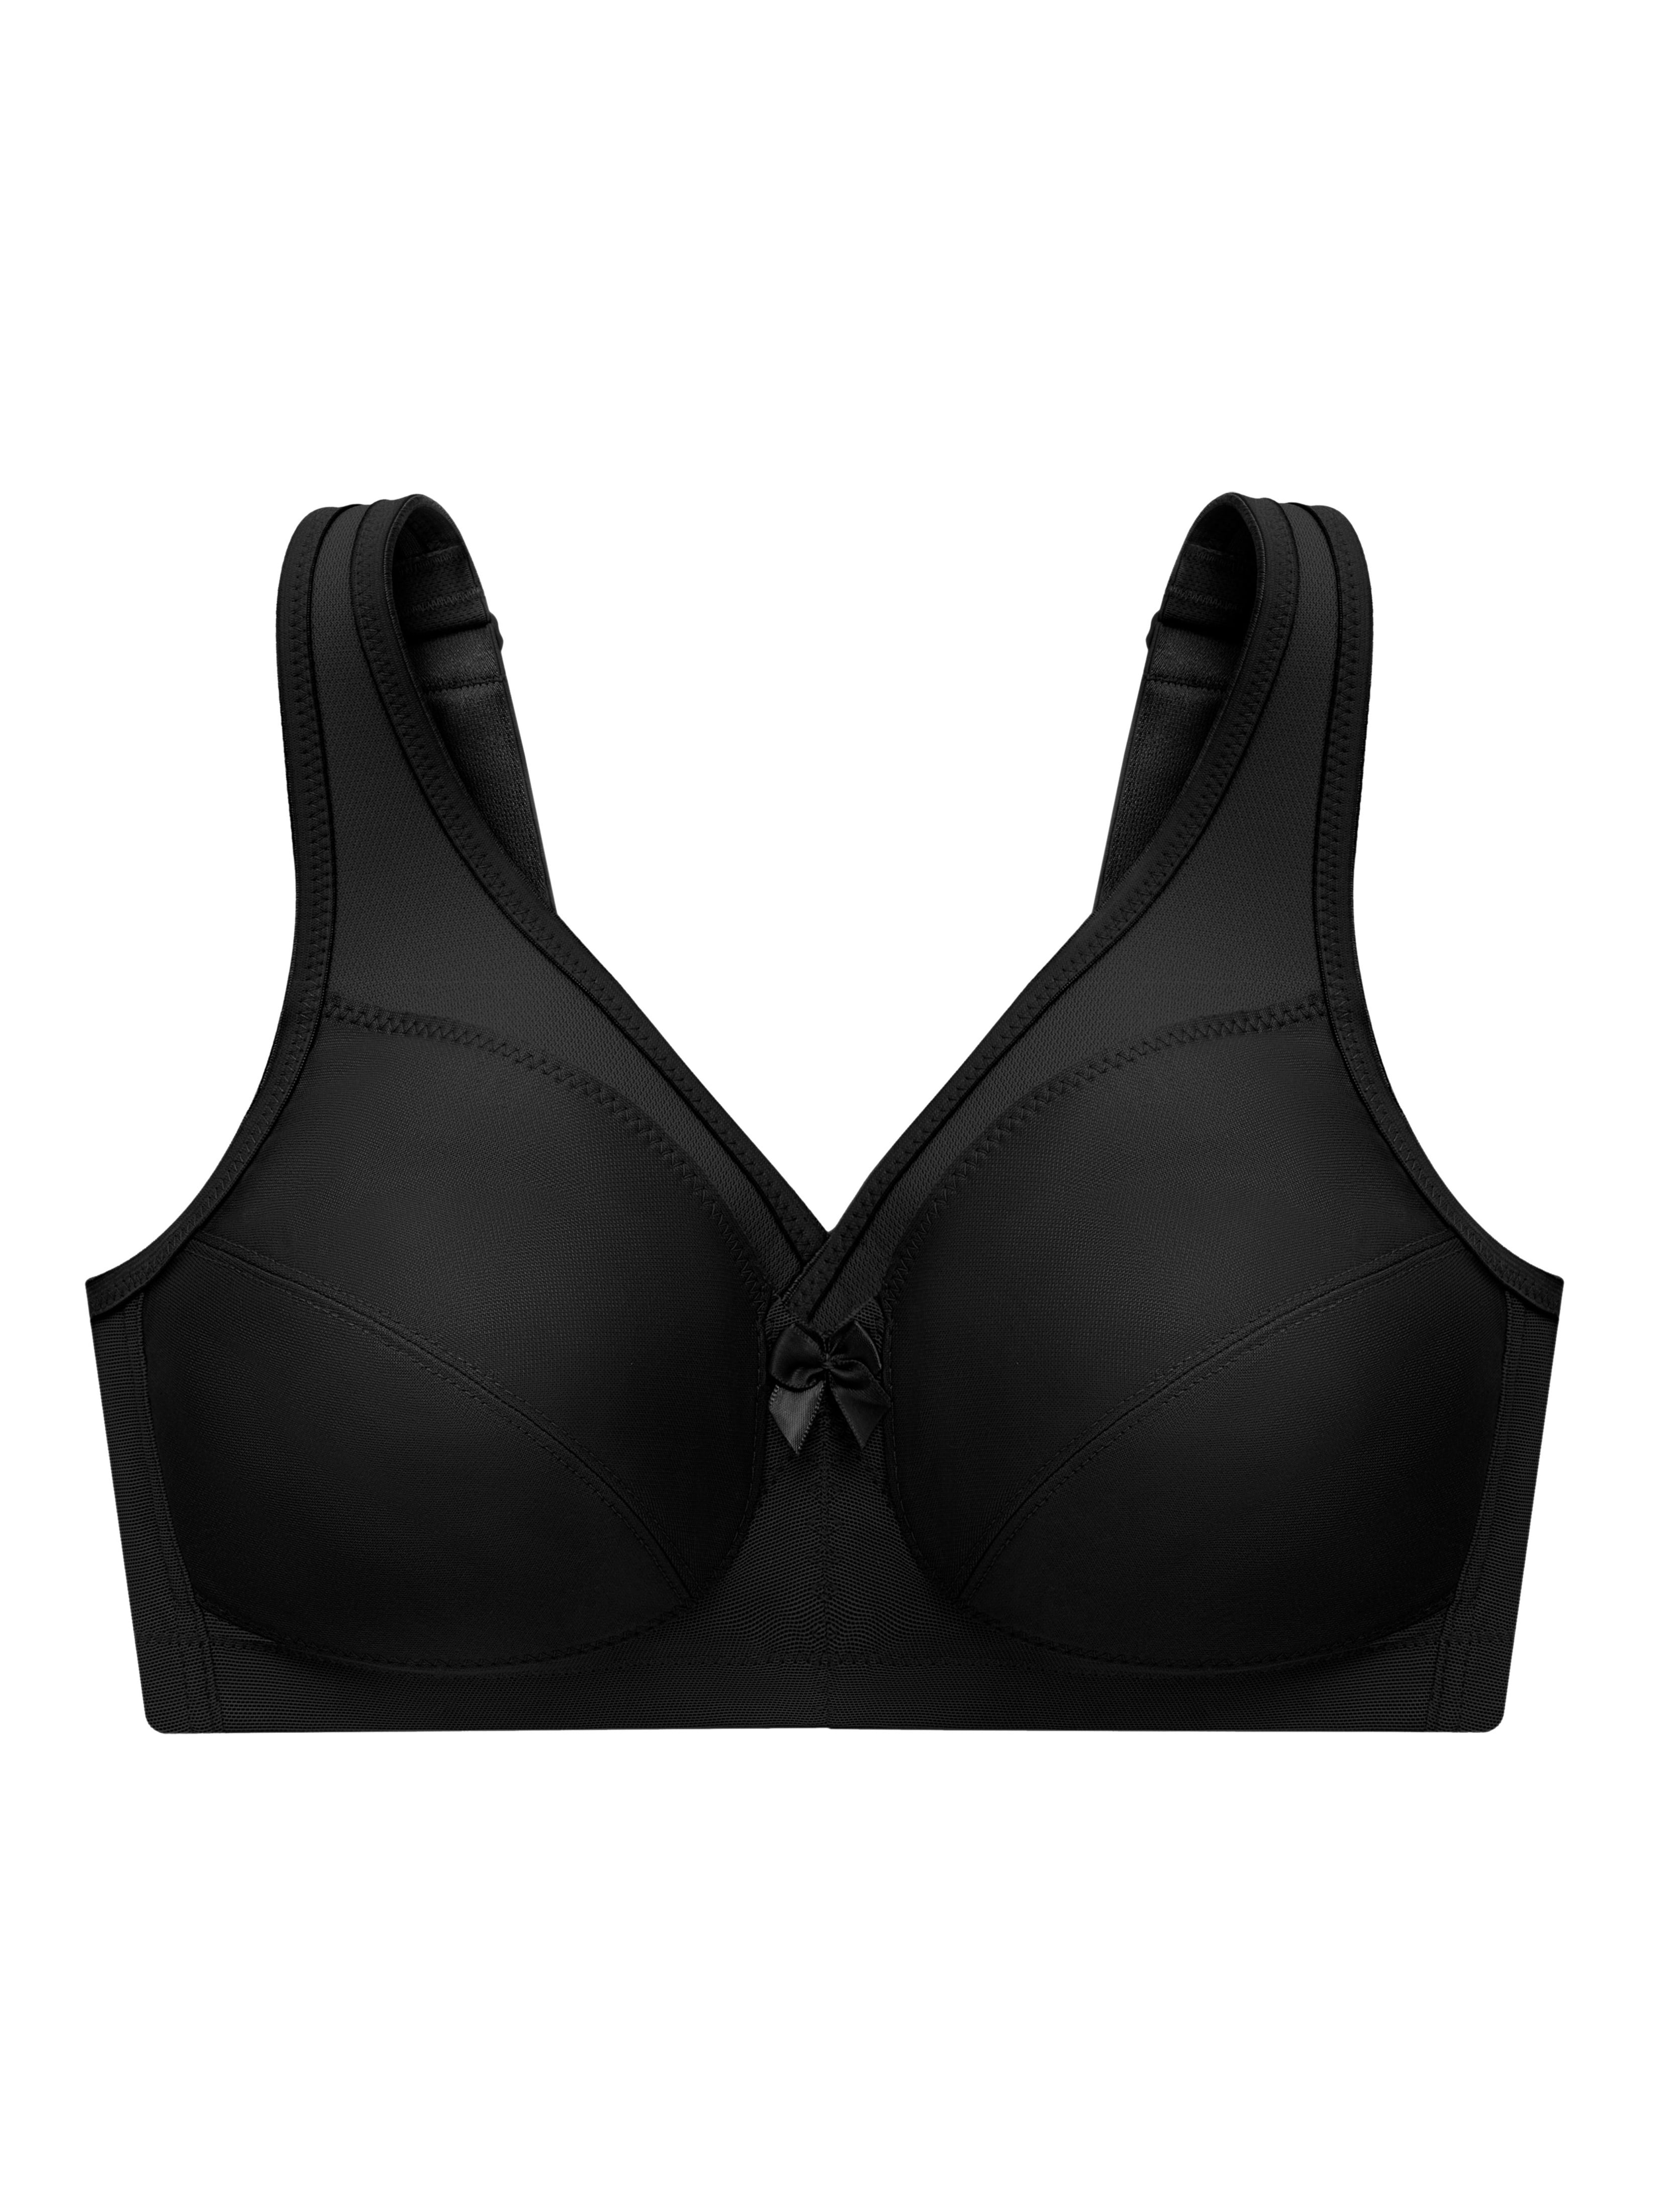 Glamorise MagicLift Active Support Bra Wire Free